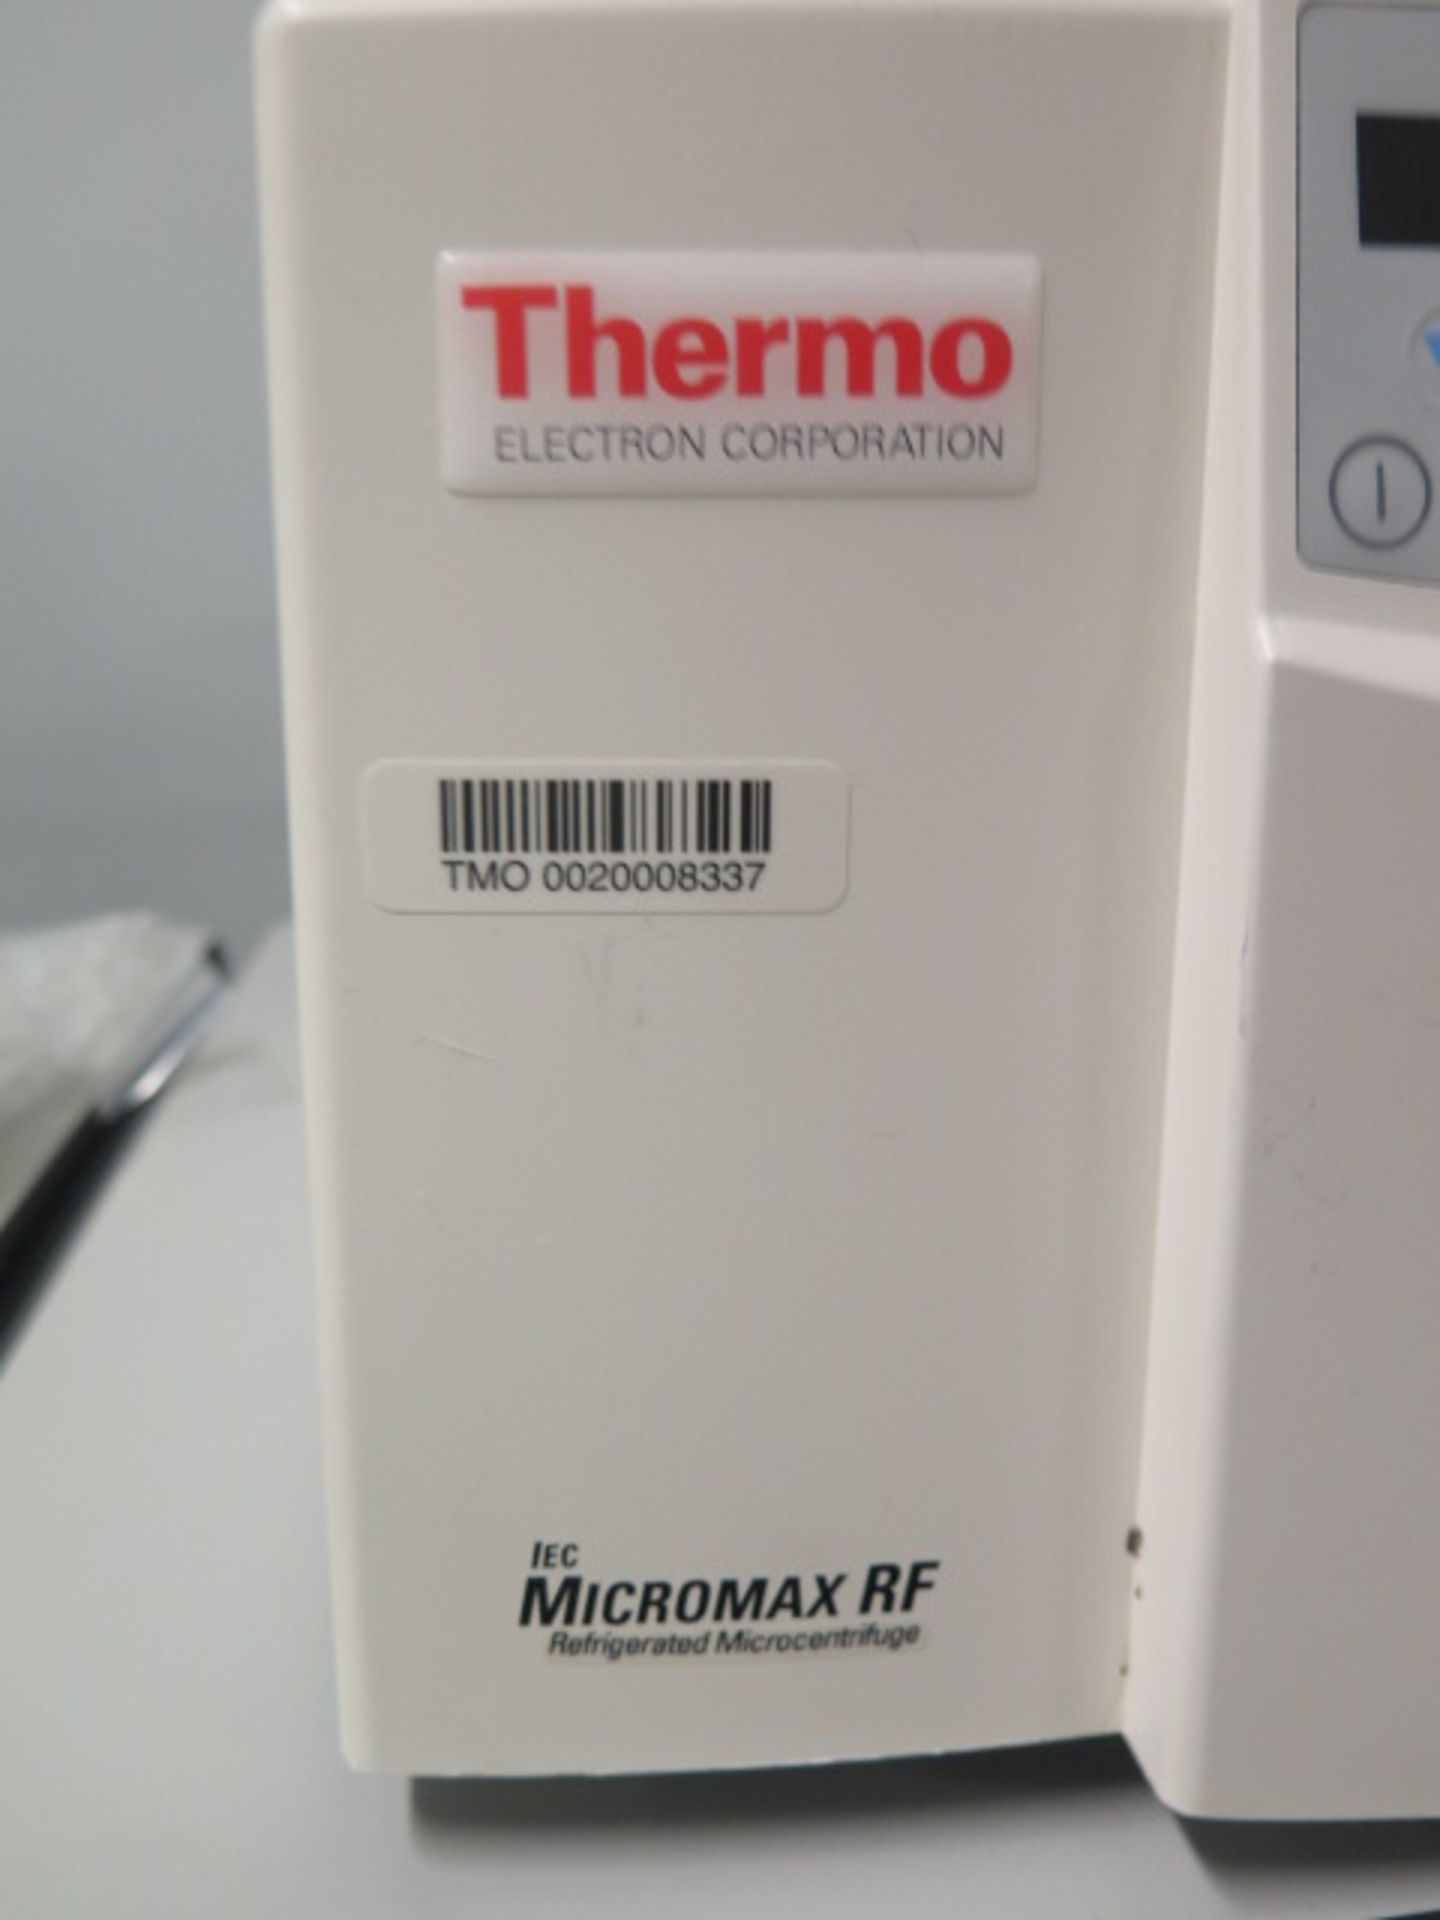 Thermo Electron "Micromax RF" mdl. 120 Refrigerated Microcentrifuge s/n 3592F2159 | Loading - Image 4 of 5